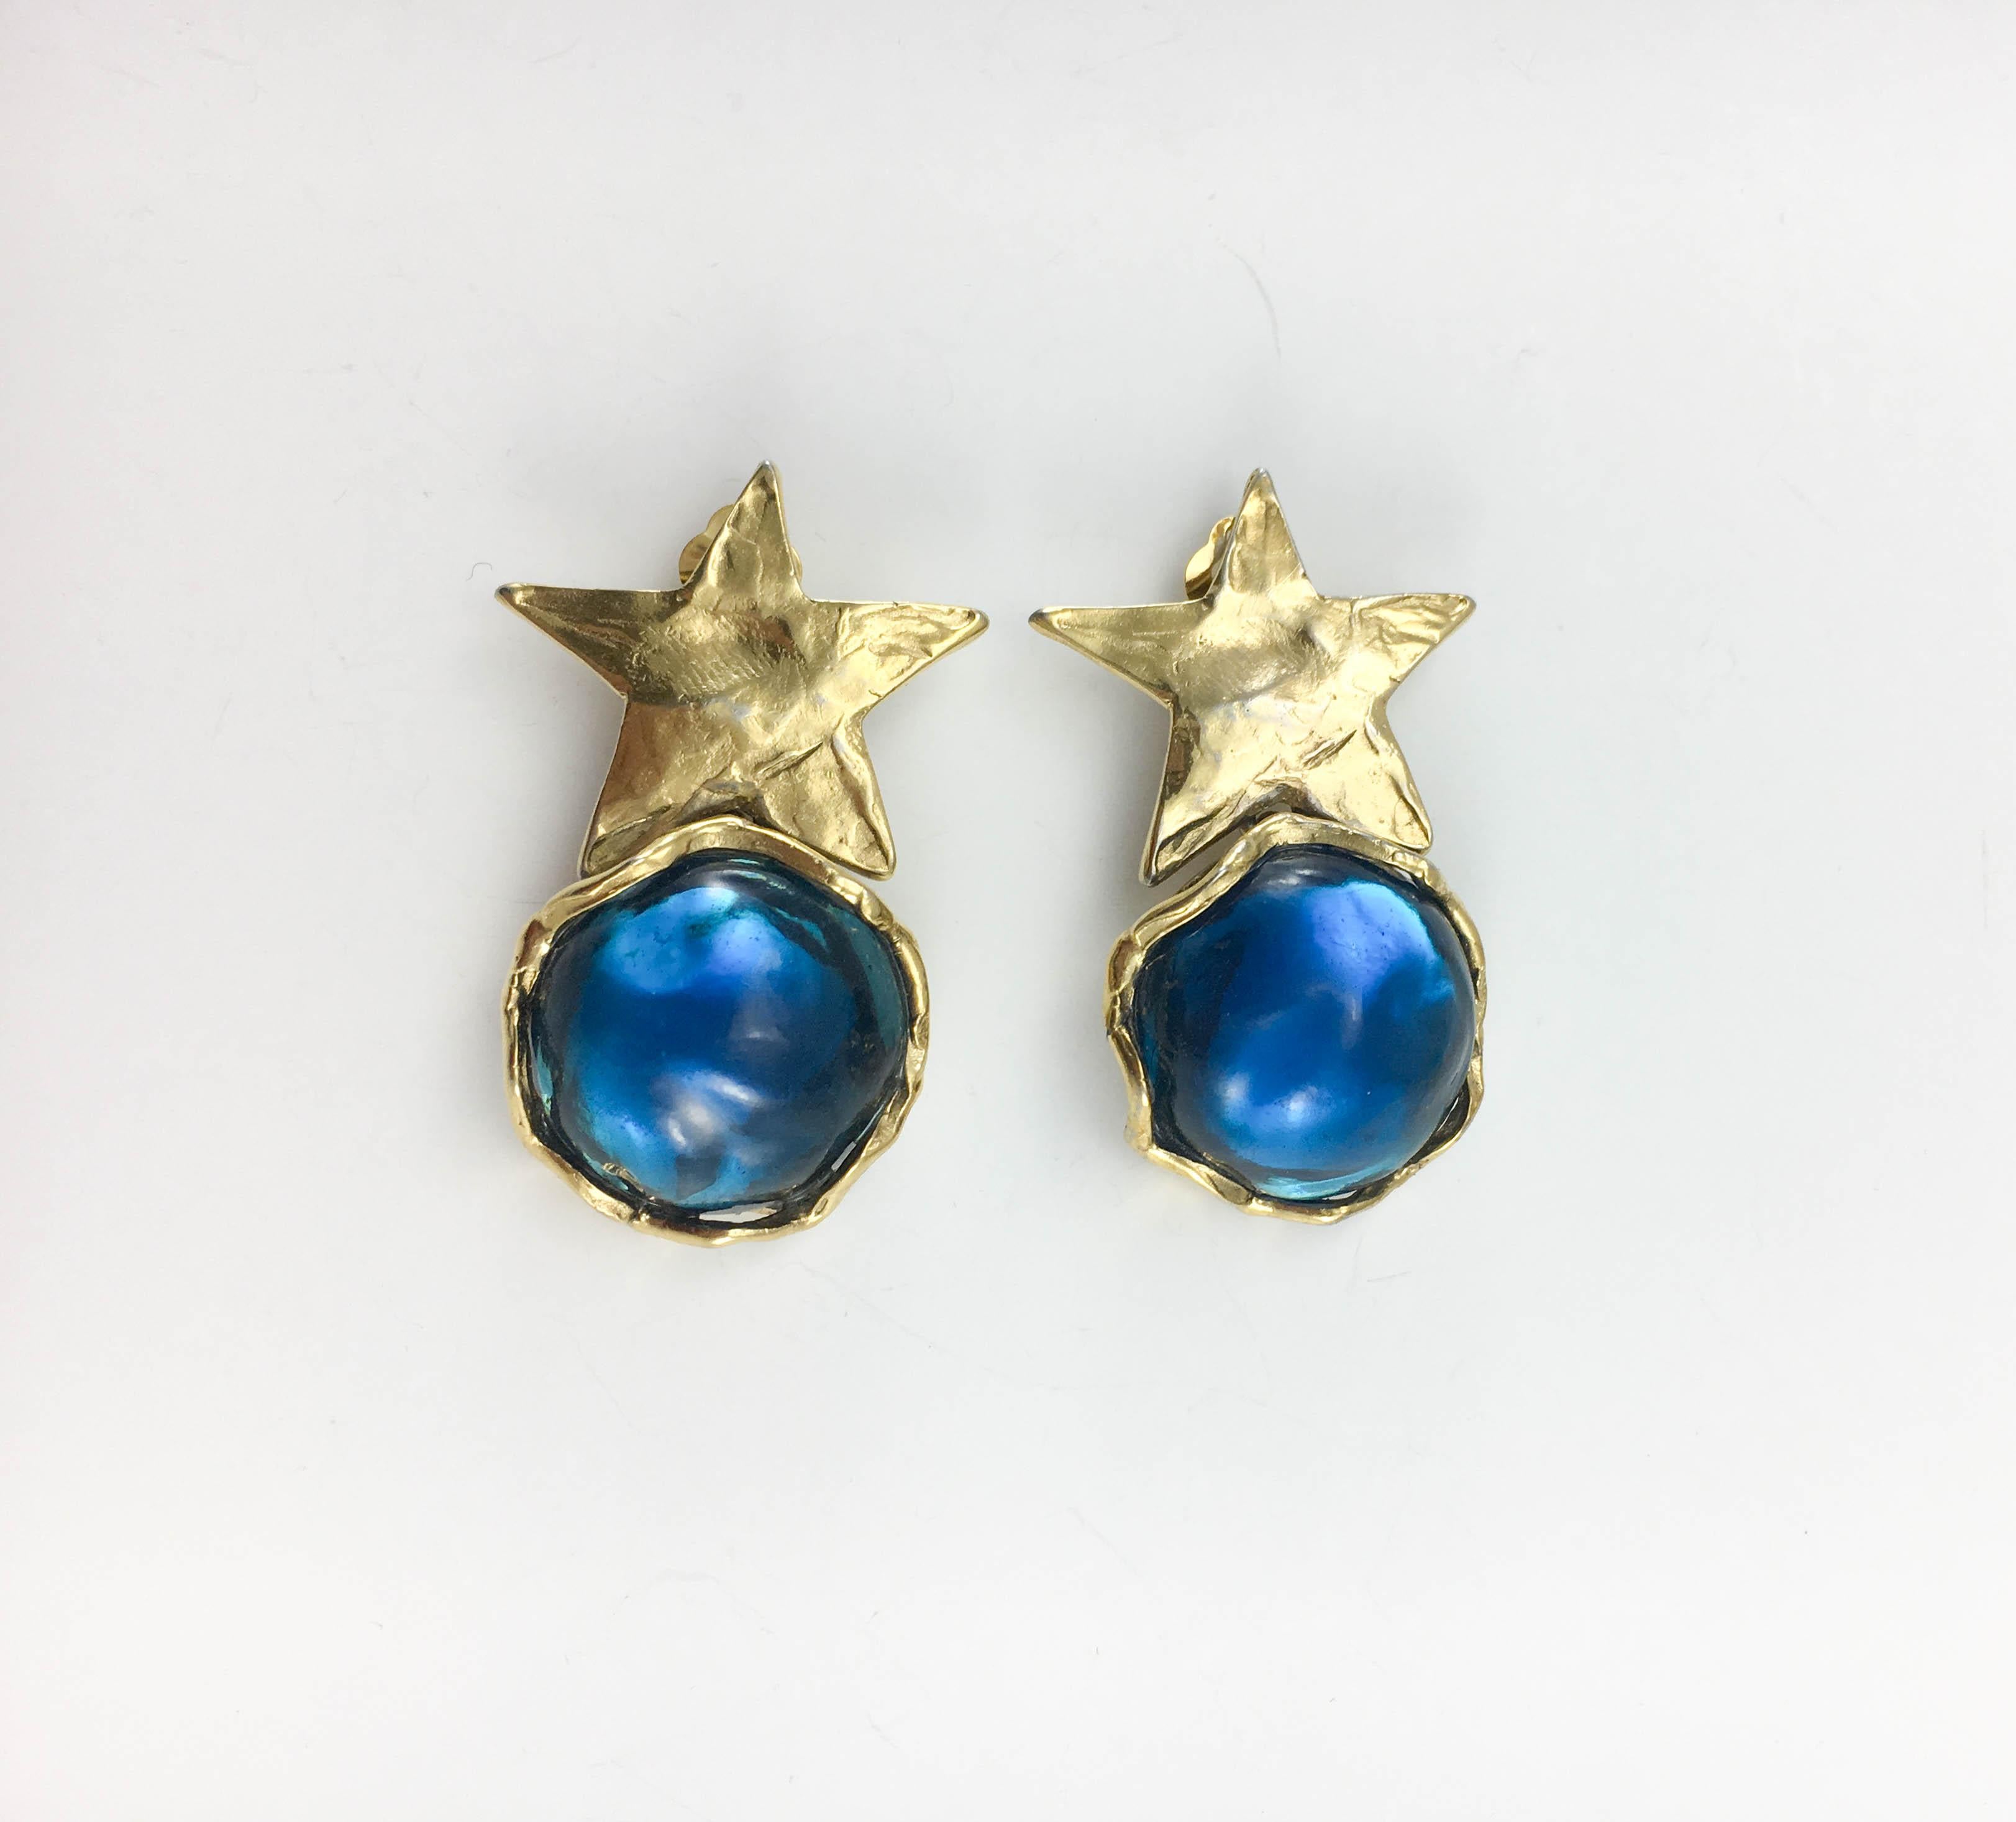 Vintage Yves Saint Laurent Blue Resin and Star Dangling Clip-On Earrings. These fabulous earrings by Yves Saint Laurent were created in the 1980’s. Made in gold-plated metal and blue resin, the metalwork has an organic look and feel. The design